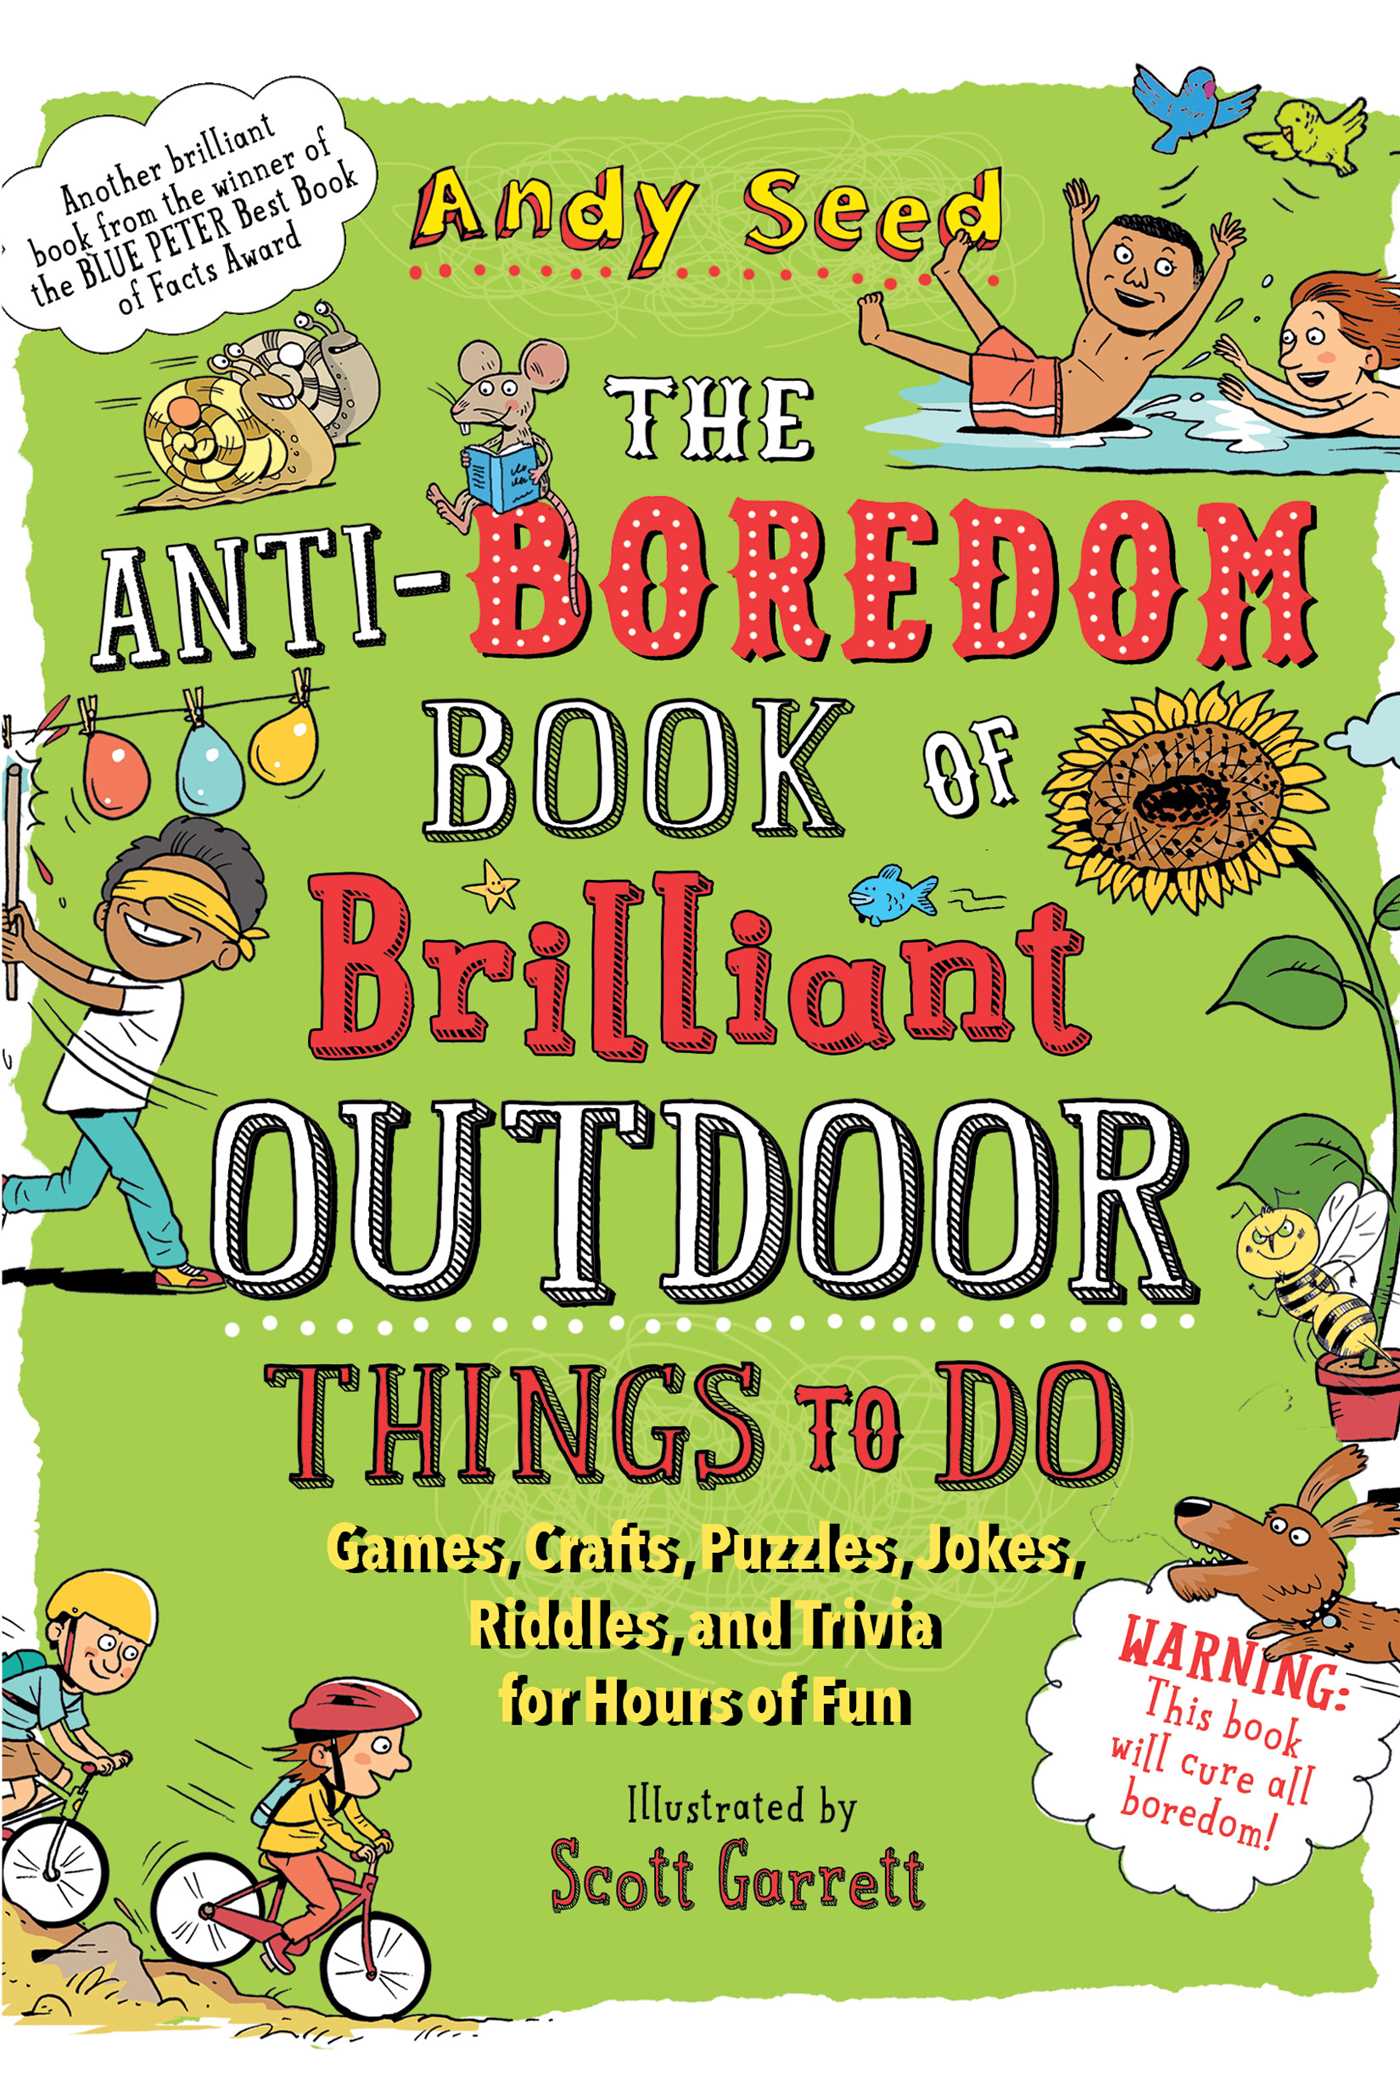 The Anti-Boredom Book of Brilliant Outdoor Things to Do